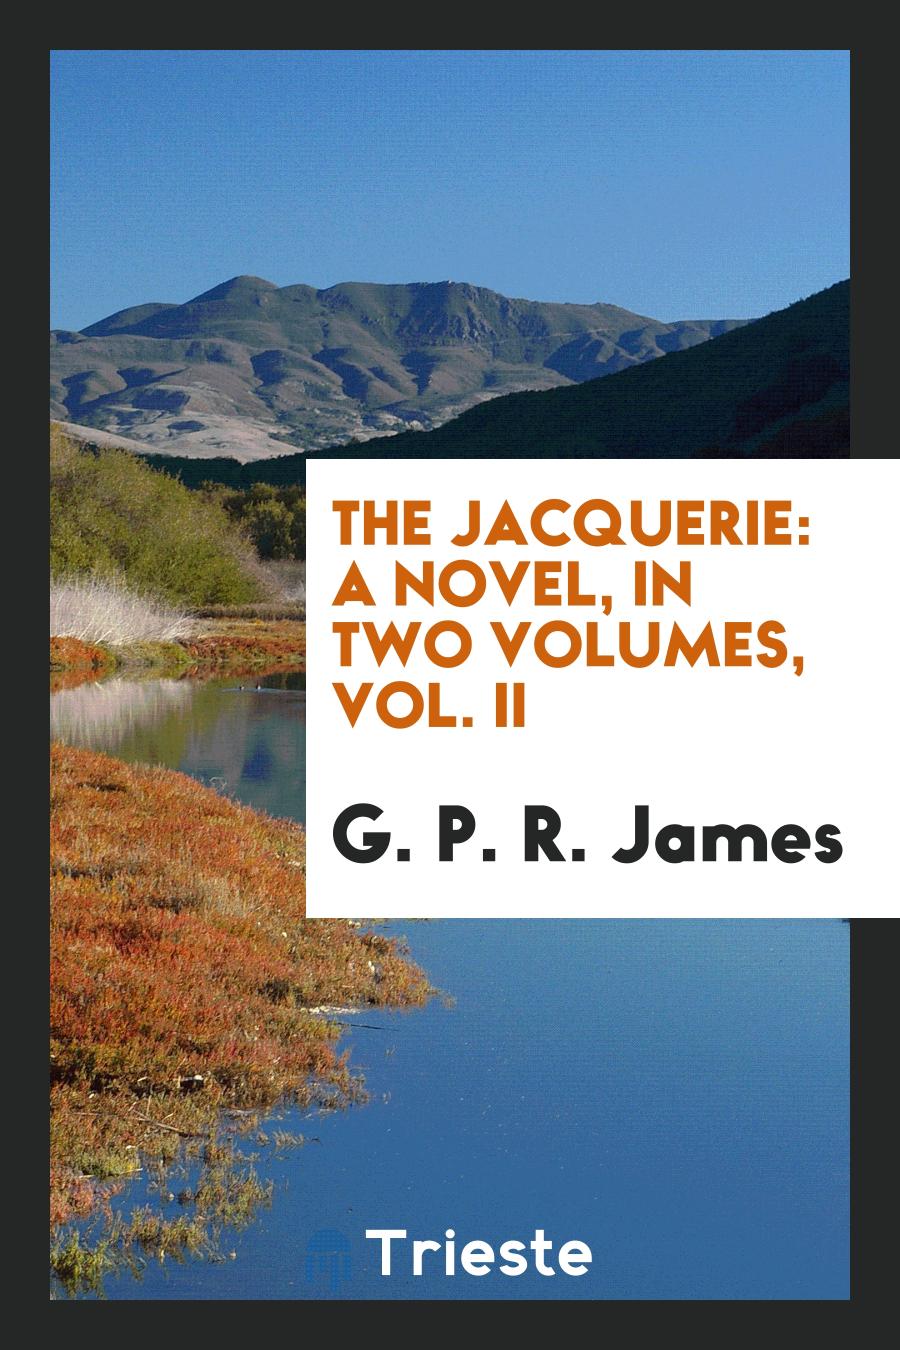 The Jacquerie: A Novel, in Two Volumes, Vol. II